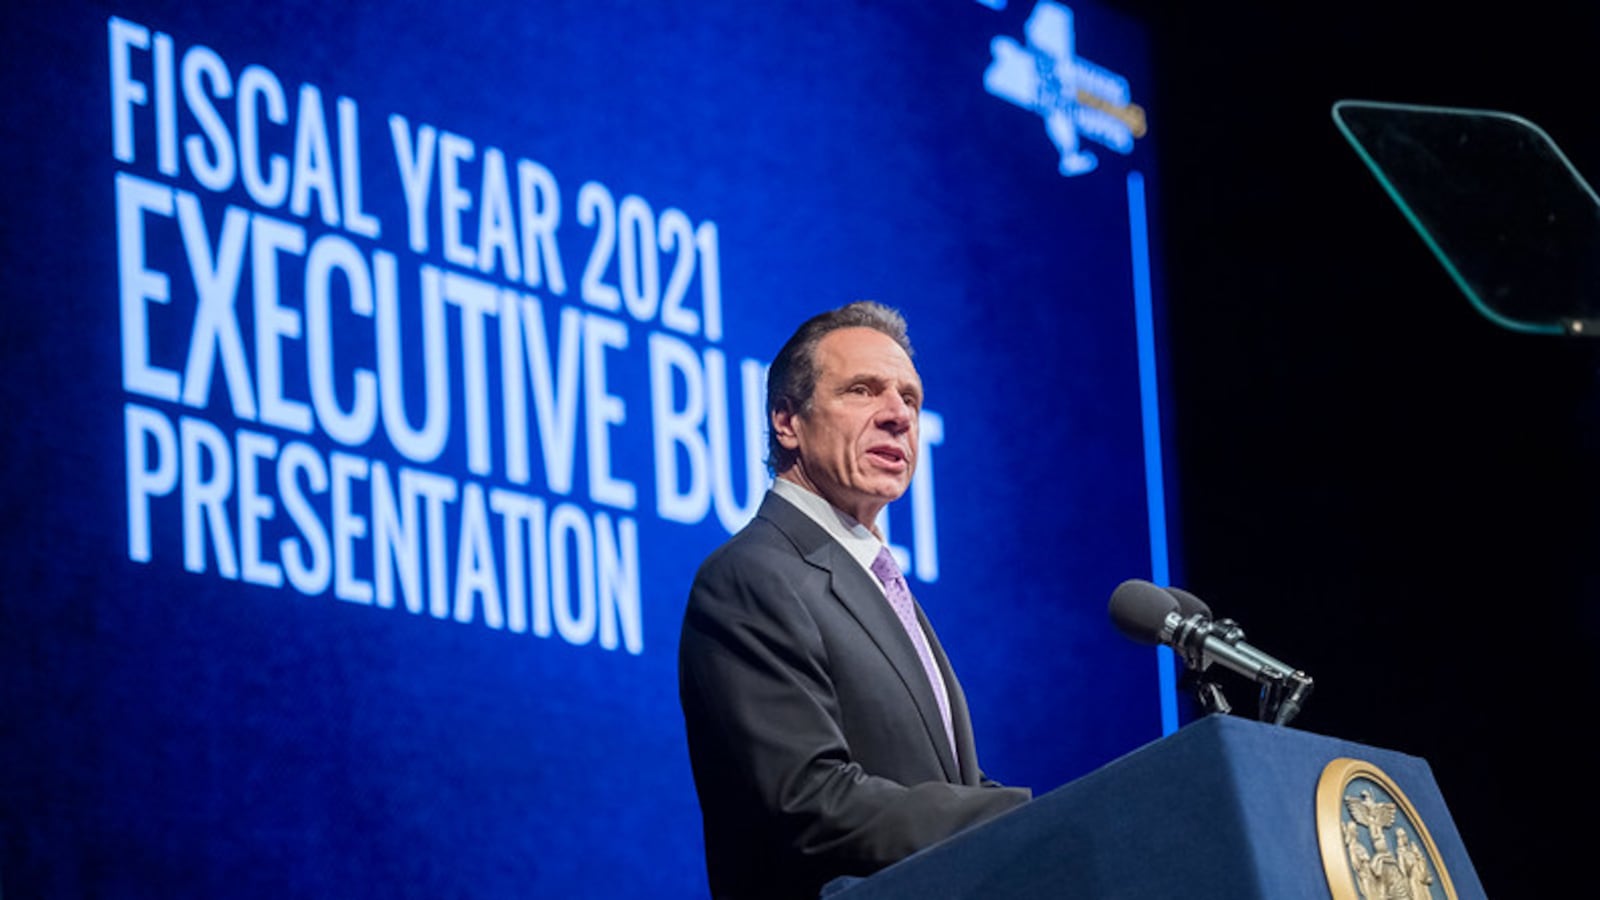 Gov. Andrew Cuomo proposes his fiscal year 2021 budget in Albany.